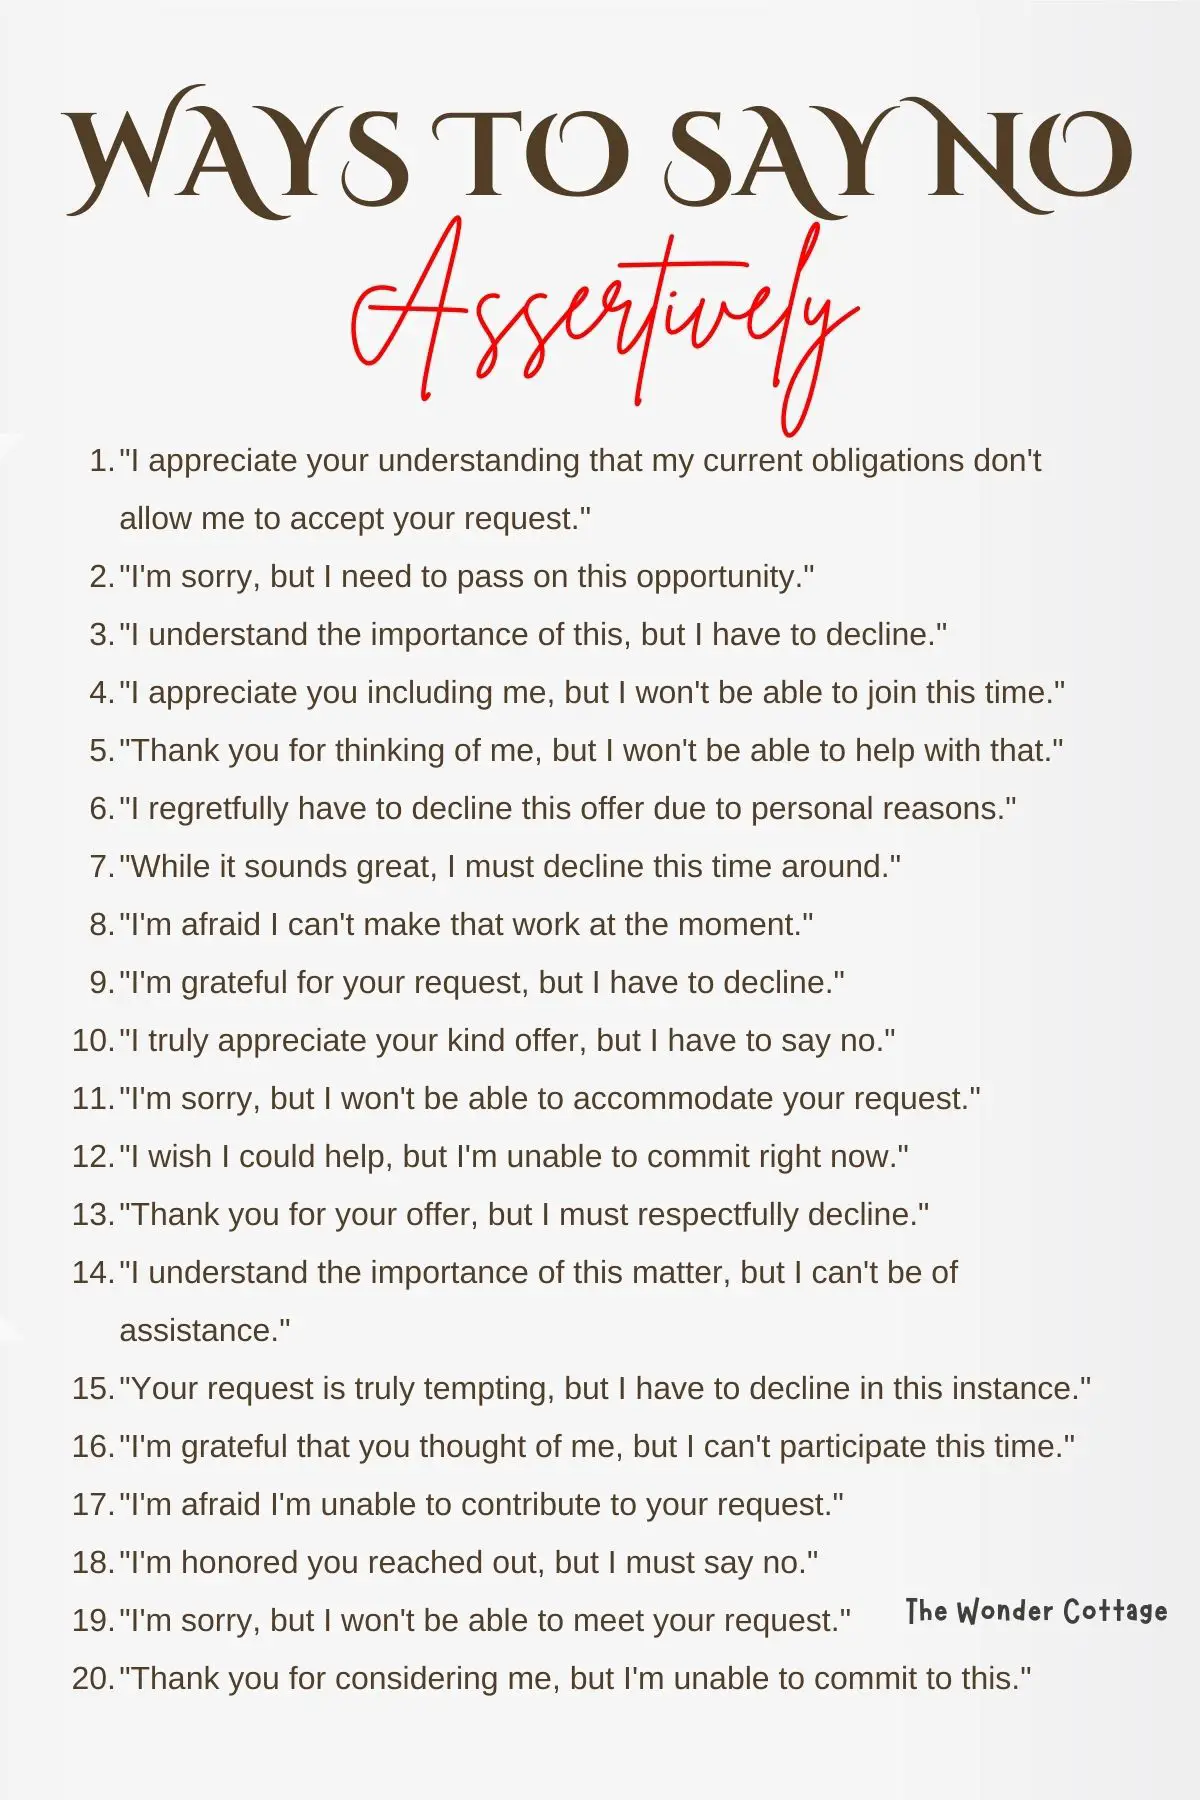 Ways to say no assertively